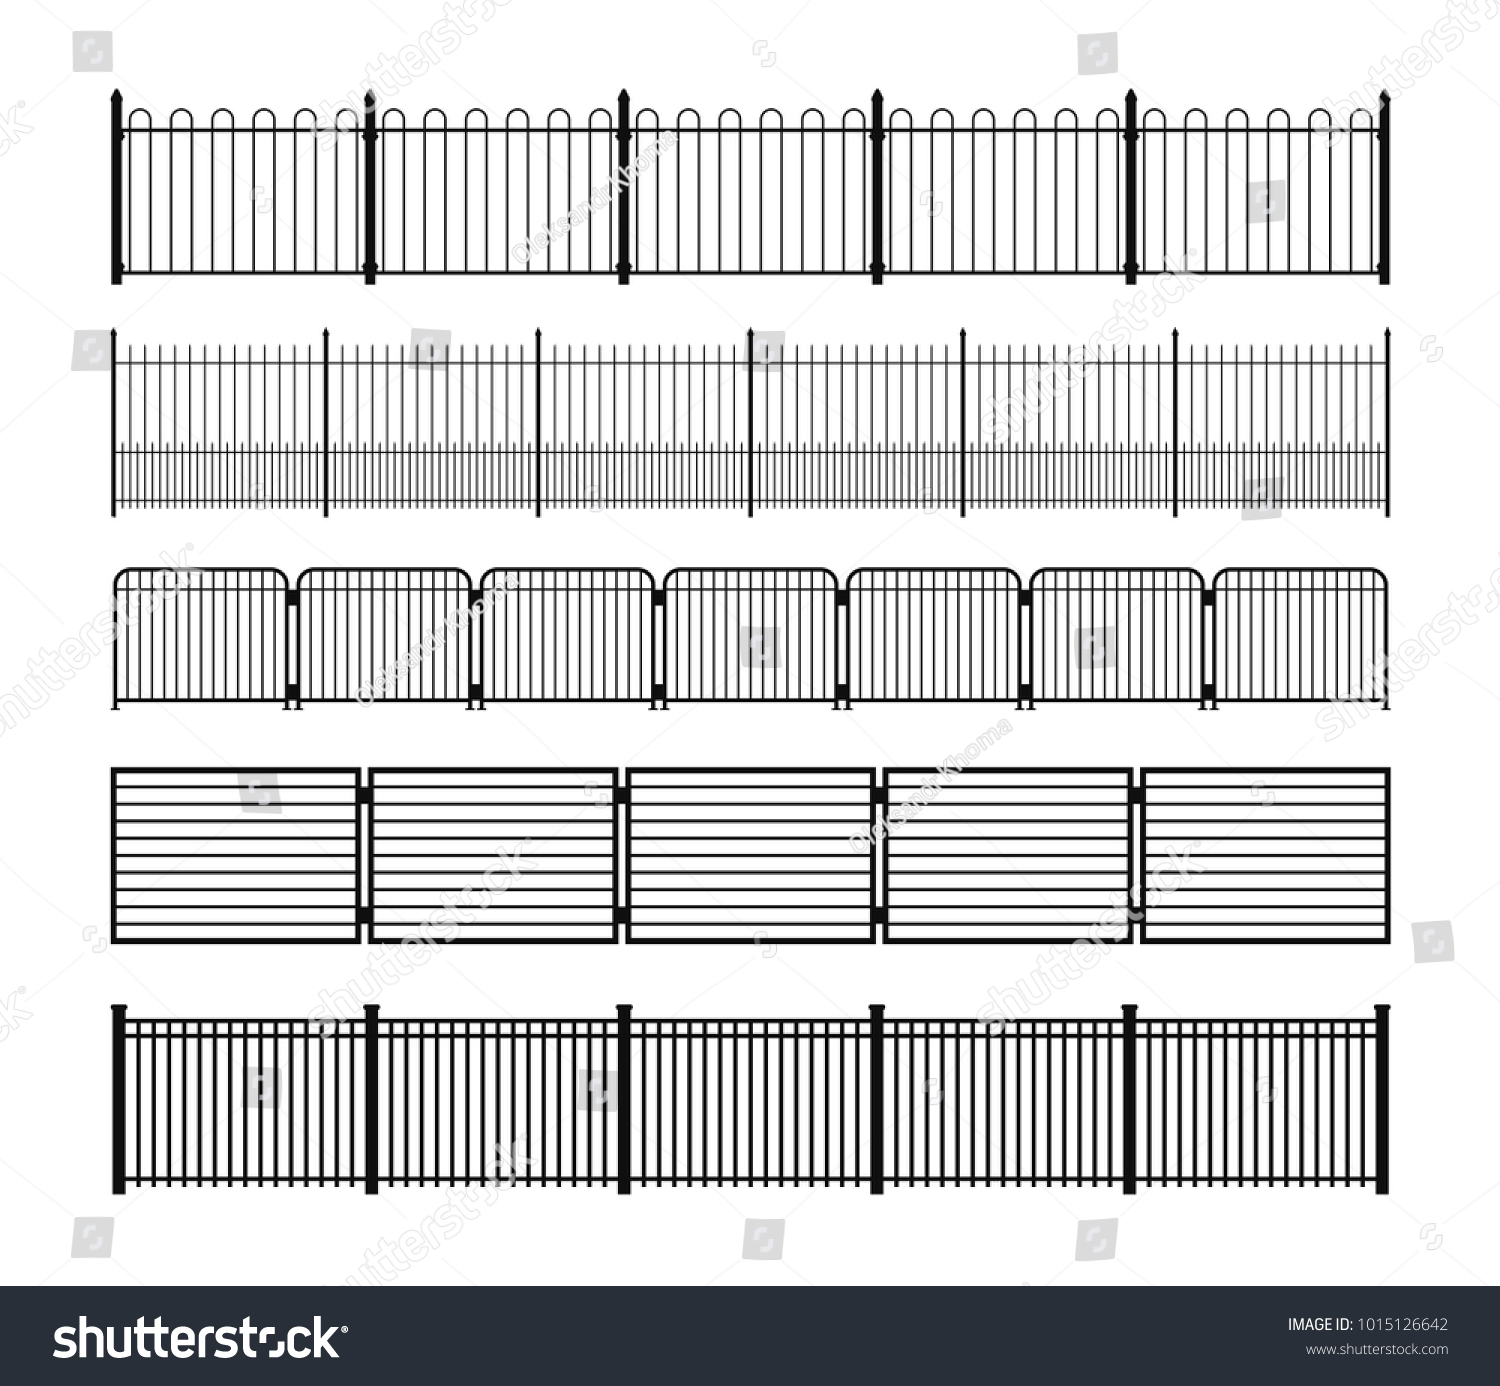 Set of different simple modular metal fence silhouettes. Horizontally seamless metal fence elements. Black fencing silhouettes from construction metal, wrought iron or steel. Vector brushes included. #1015126642